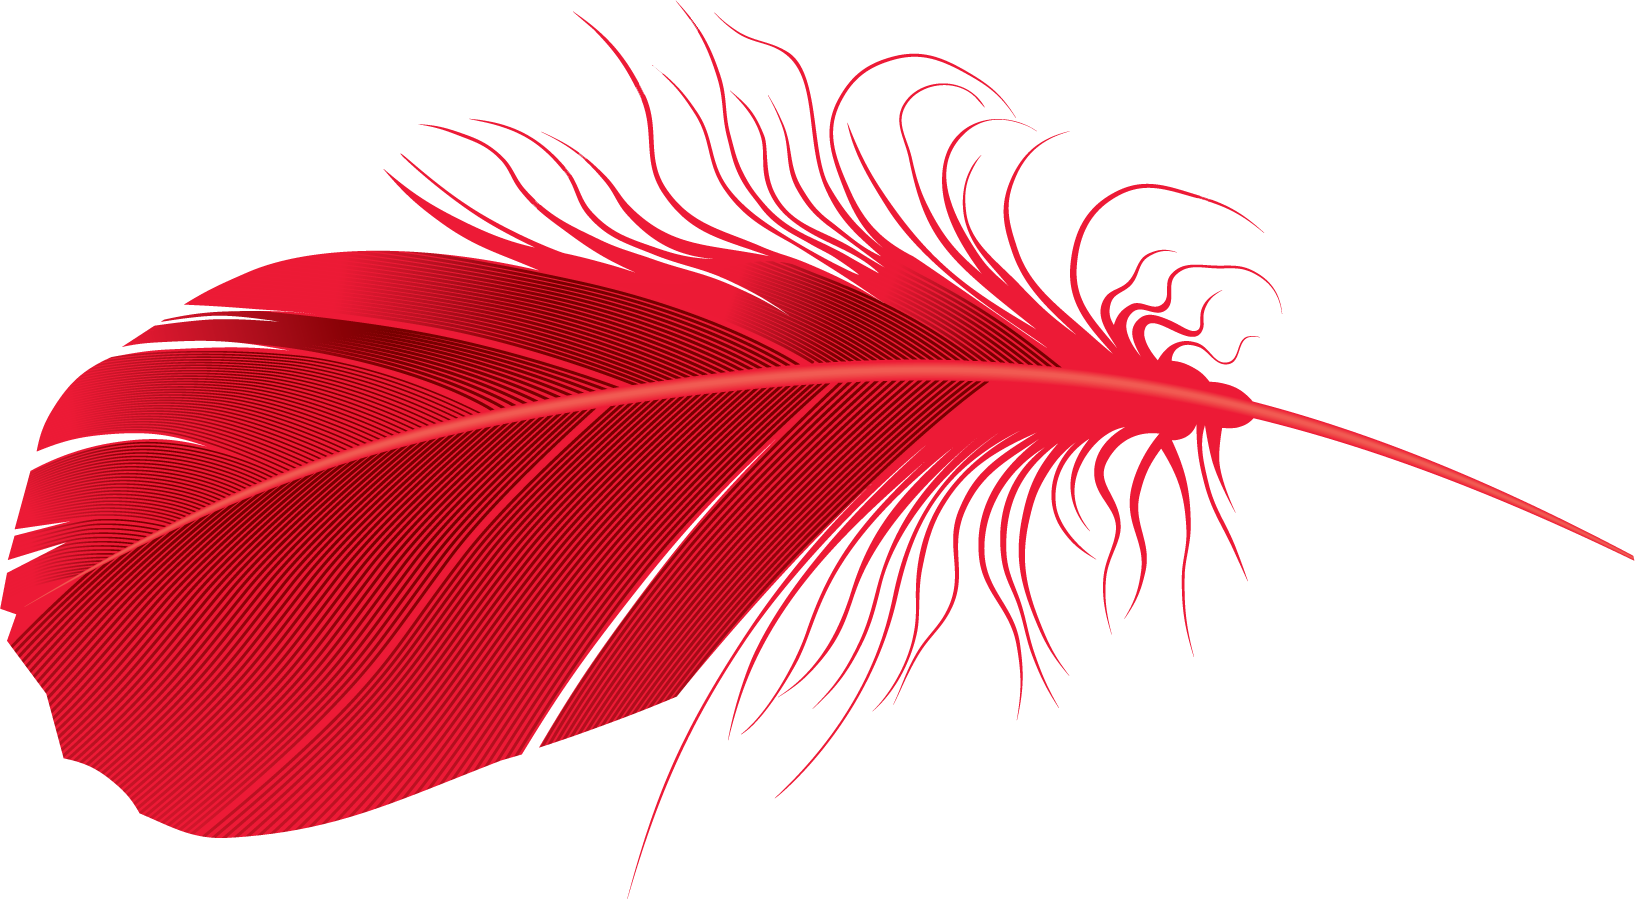 feathers clipart individual